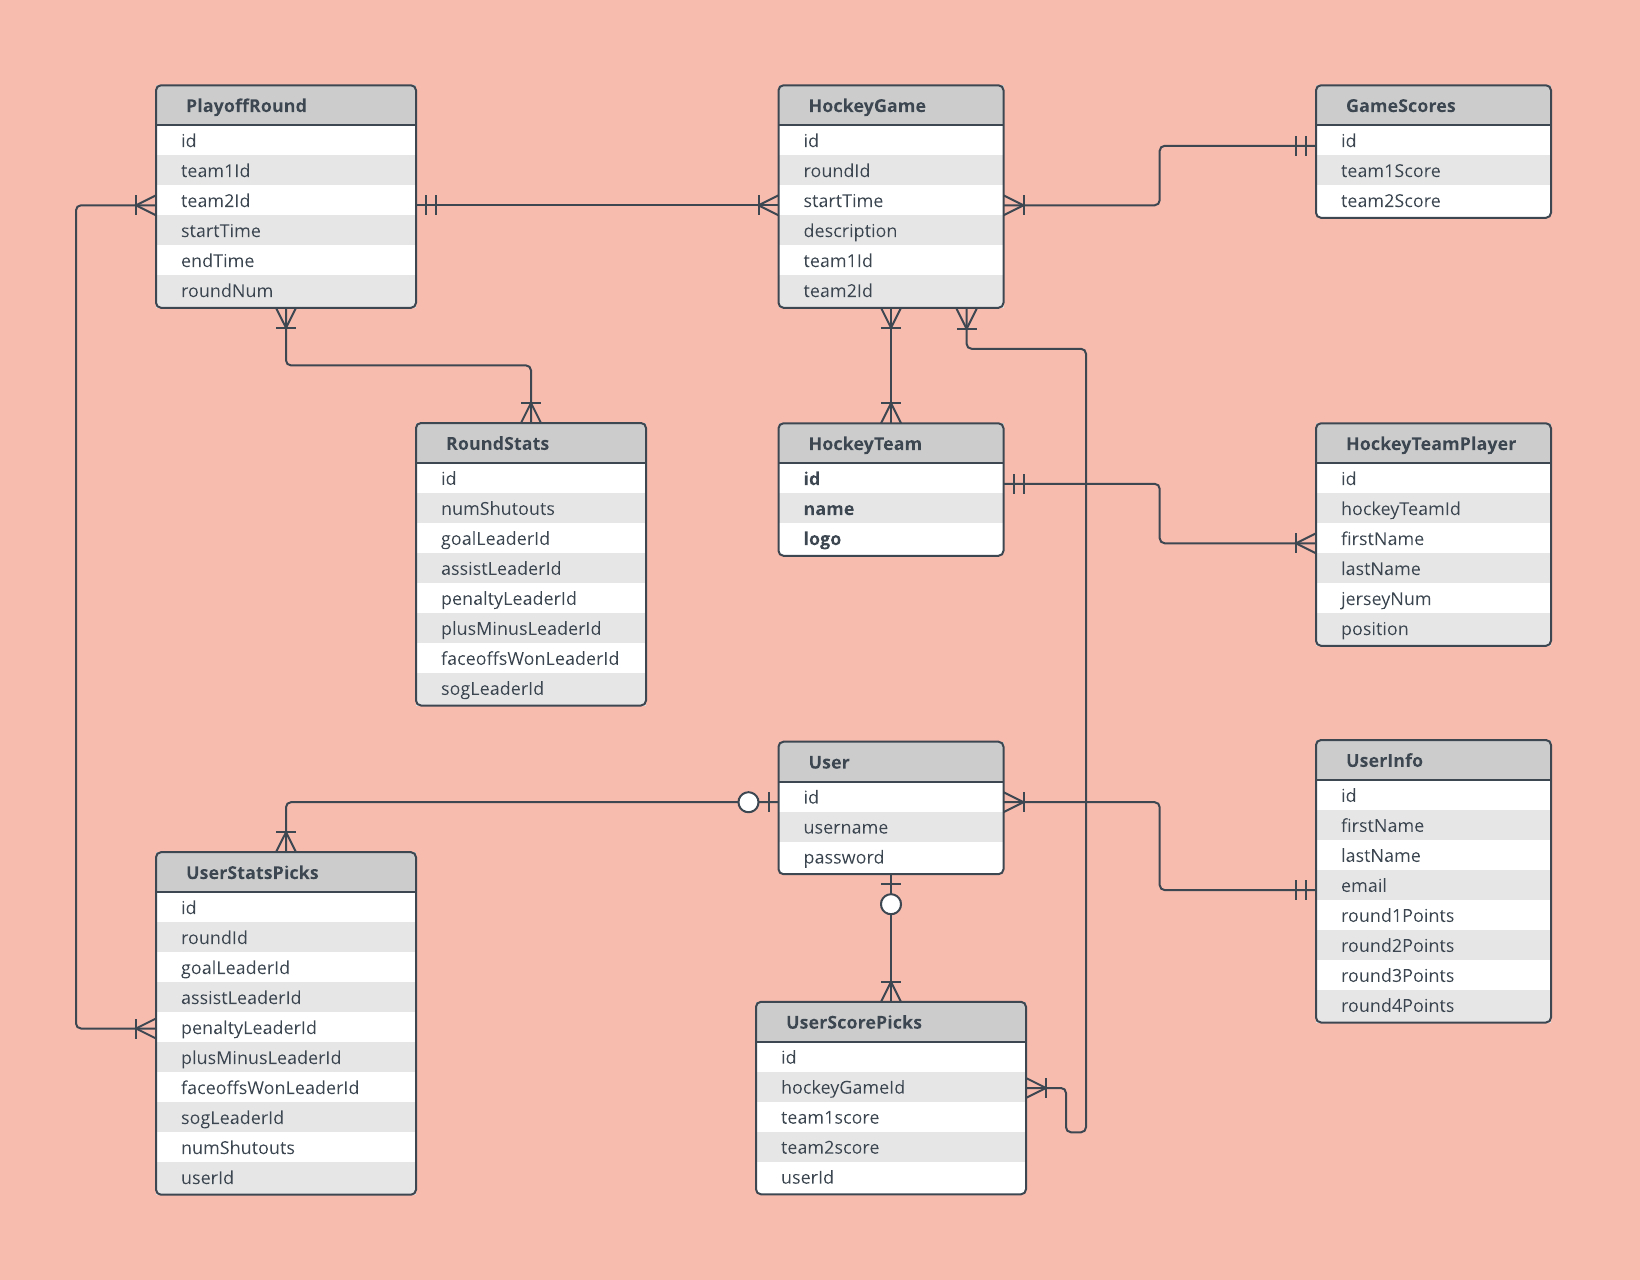 Er Diagram Examples And Templates | Lucidchart with regard to Er Diagram Practice Examples